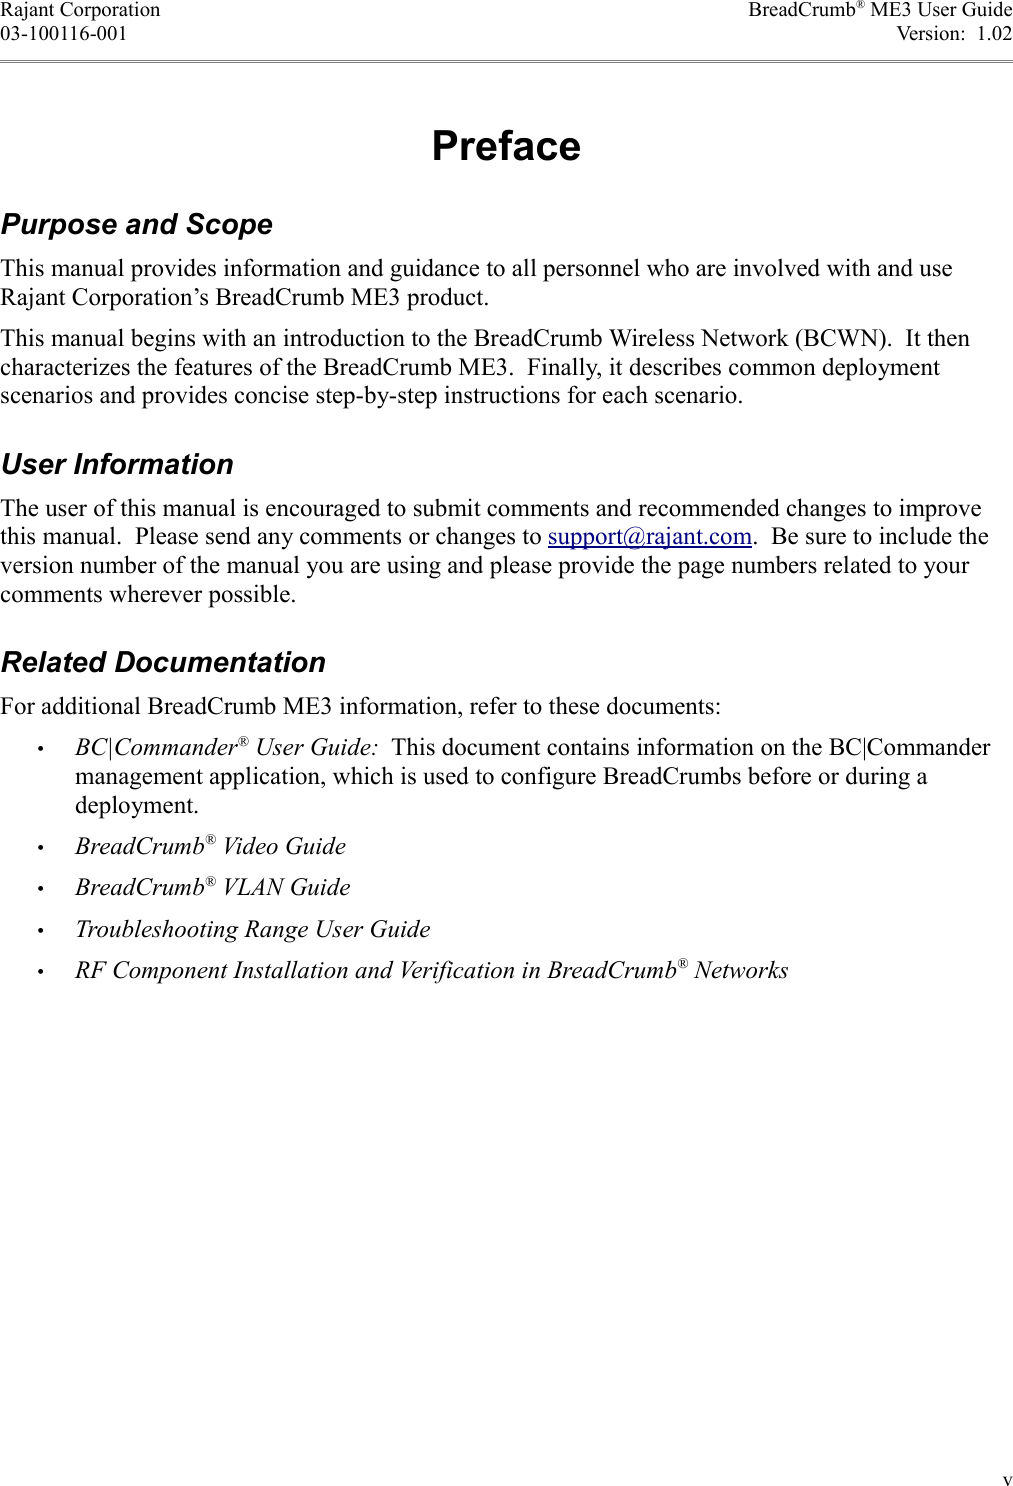 Rajant Corporation BreadCrumb® ME3 User Guide03-100116-001 Version:  1.02PrefacePurpose and ScopeThis manual provides information and guidance to all personnel who are involved with and use Rajant Corporation’s BreadCrumb ME3 product.This manual begins with an introduction to the BreadCrumb Wireless Network (BCWN).  It then characterizes the features of the BreadCrumb ME3.  Finally, it describes common deployment scenarios and provides concise step-by-step instructions for each scenario.User InformationThe user of this manual is encouraged to submit comments and recommended changes to improve this manual.  Please send any comments or changes to support@rajant.com.  Be sure to include the version number of the manual you are using and please provide the page numbers related to your comments wherever possible.Related DocumentationFor additional BreadCrumb ME3 information, refer to these documents:•BC|Commander® User Guide:  This document contains information on the BC|Commander management application, which is used to configure BreadCrumbs before or during a deployment.•BreadCrumb® Video Guide•BreadCrumb® VLAN Guide•Troubleshooting Range User Guide•RF Component Installation and Verification in BreadCrumb® Networksv